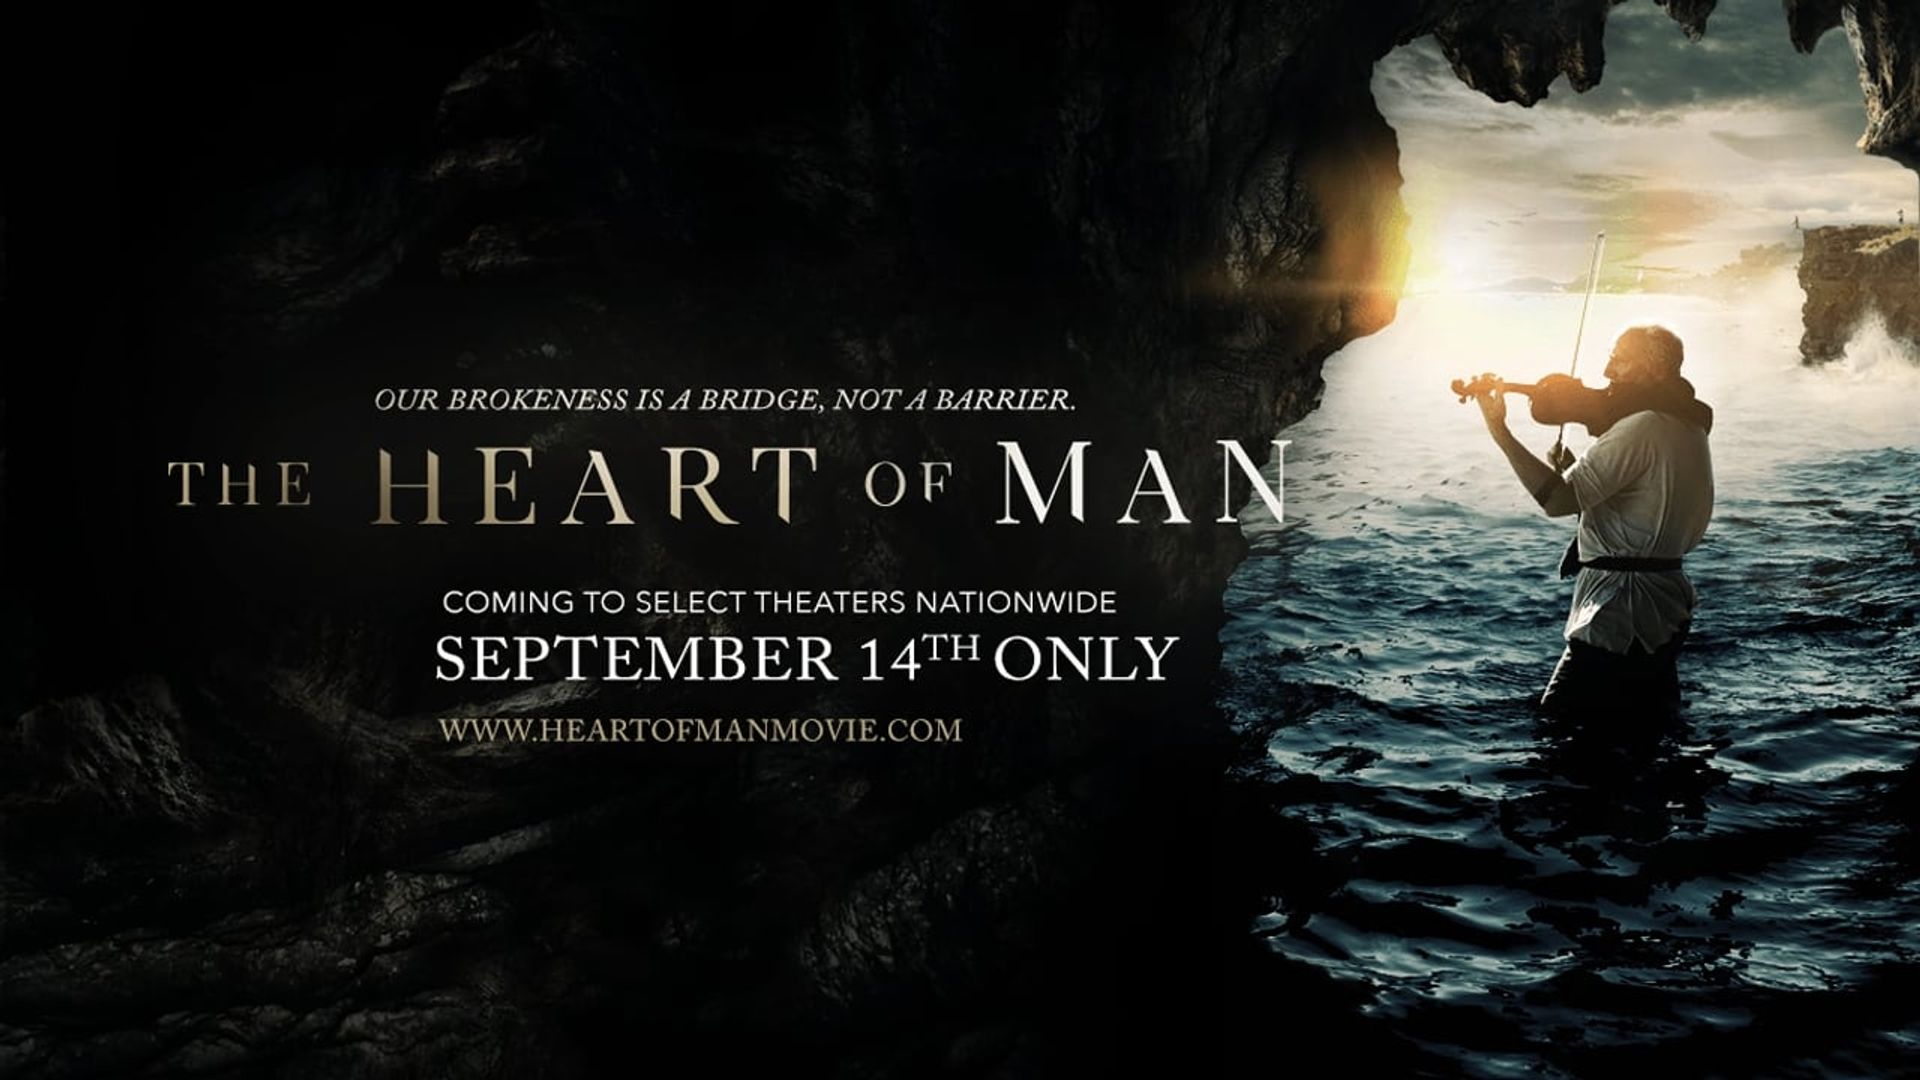 The Heart of Man background